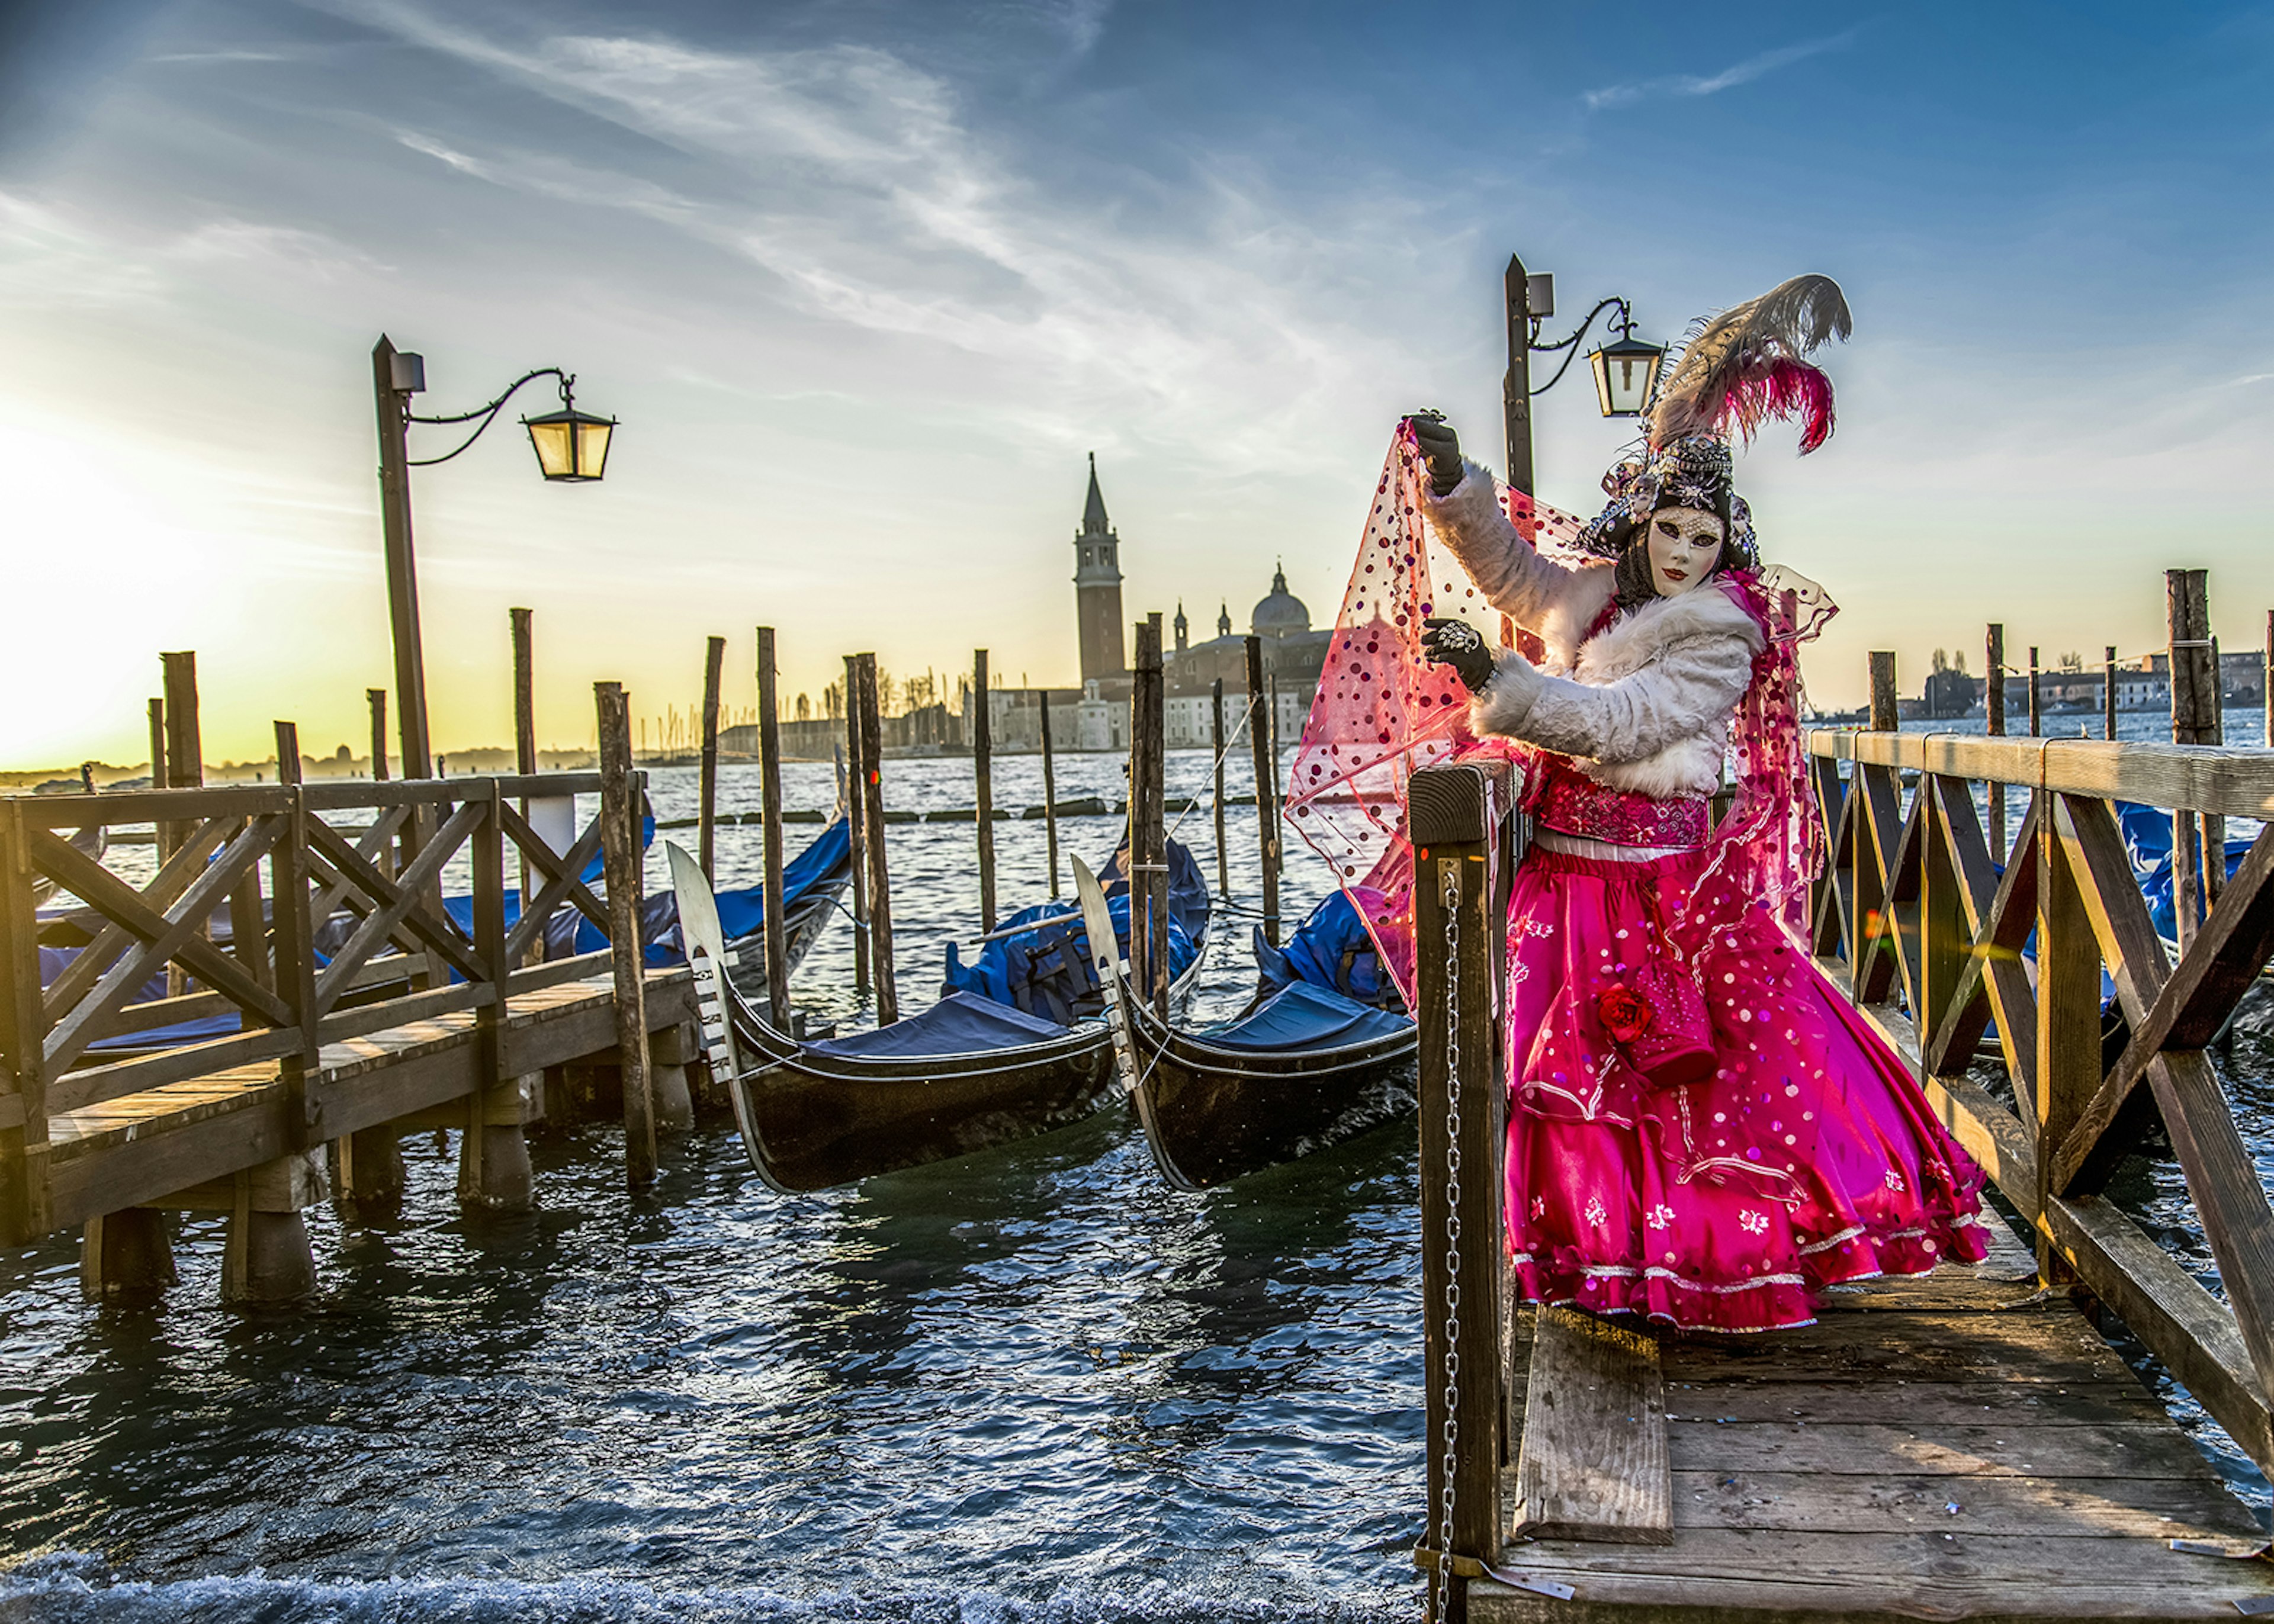 A masked person in a bright pink 18th century venetian costume throws their wrap into the wind over one of Venice's twinkling canals in front of parked gondolas and a setting sun - Lonely Planet © Vigen M / Shutterstock